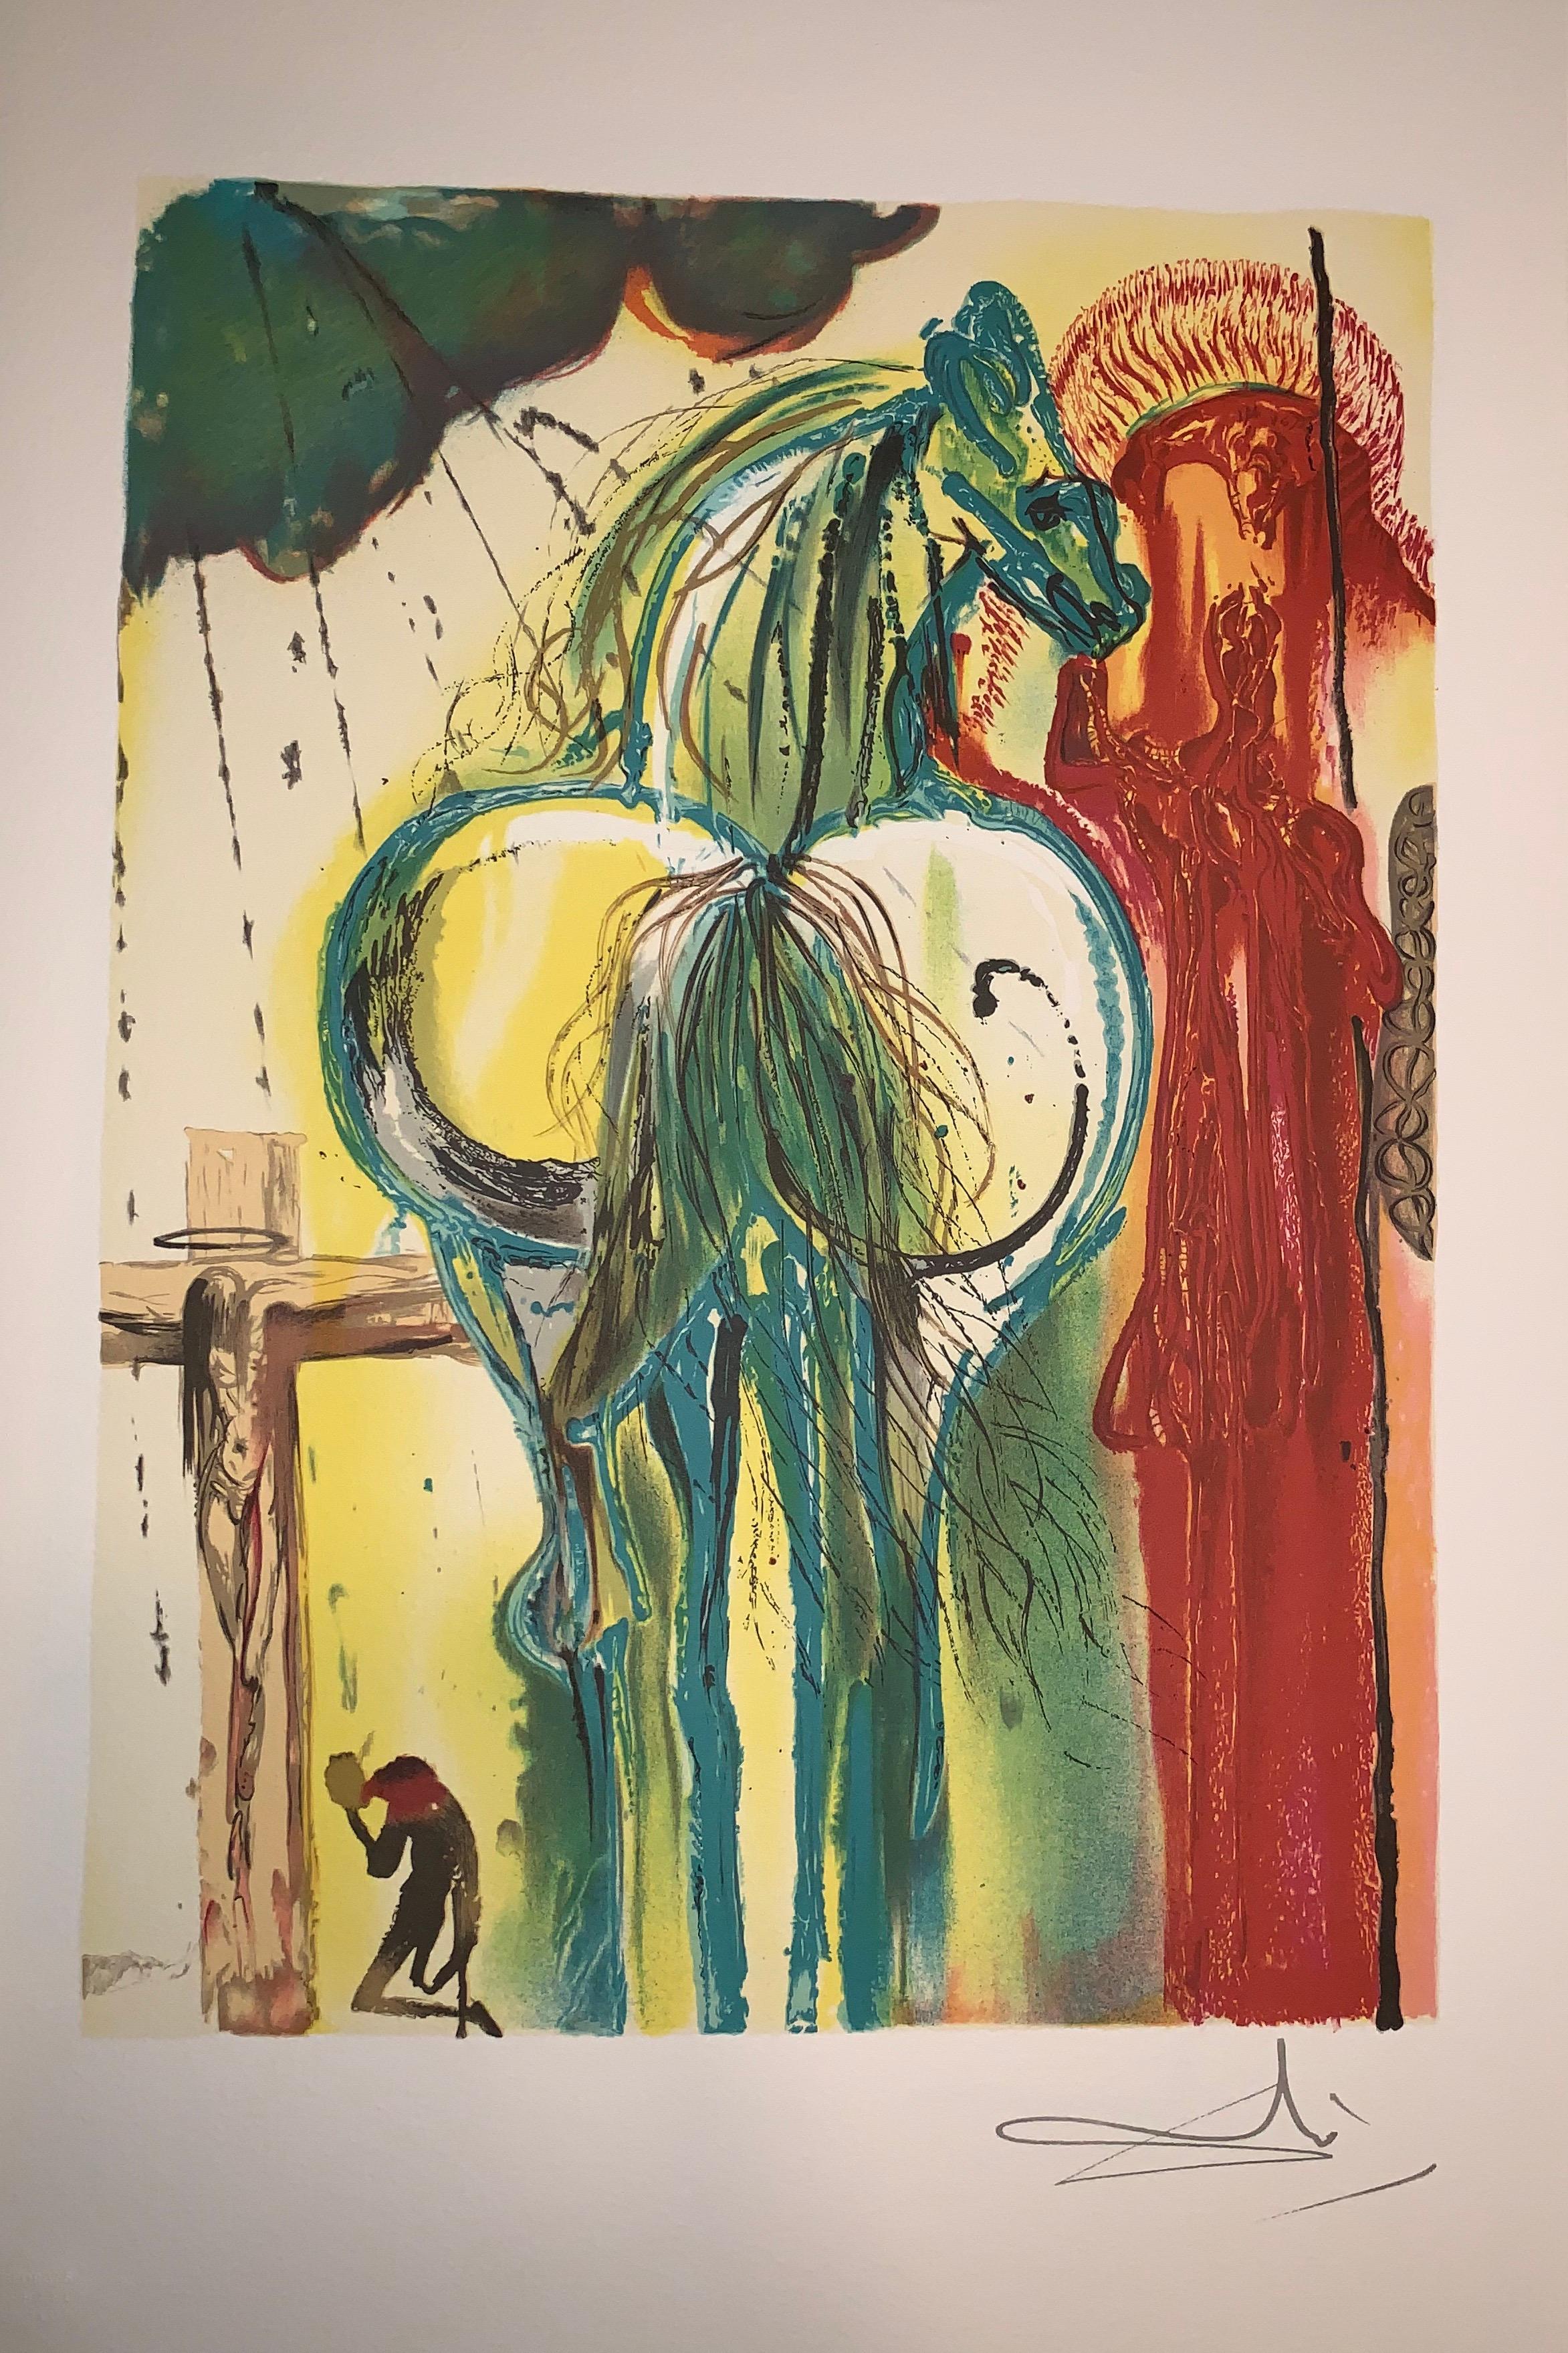 Le Centurion The horses of Dali - Lithograph - Surrealist - 1983 - Print by (after) Salvador Dali